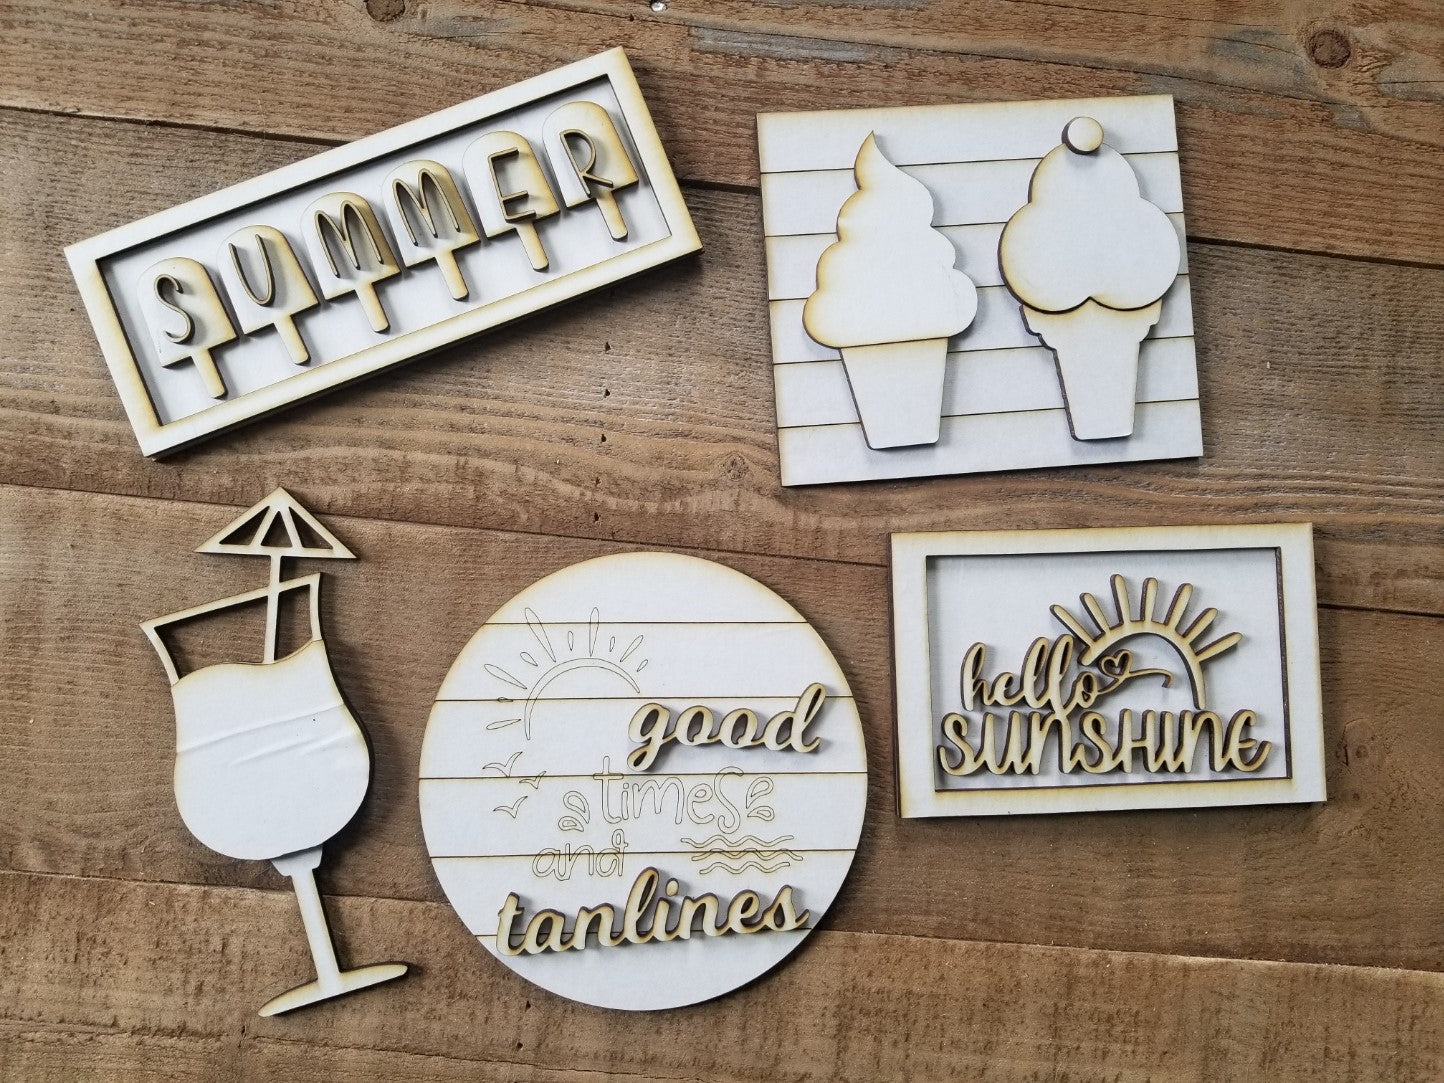 Wood Signs  Wood Rounds  Wood Blanks  Wood Blank  USA  tray  Transfers  Summer  Spring  Sign Bundles  Shape Blanks  Rounds  Ornament  Laser DIY  Kitchen  kit  Home  Gift  Fun  Door Hanger  diy  Cute  Crafty Gifts  Celebrate  Blank Shapes  Beach Ball  Beach